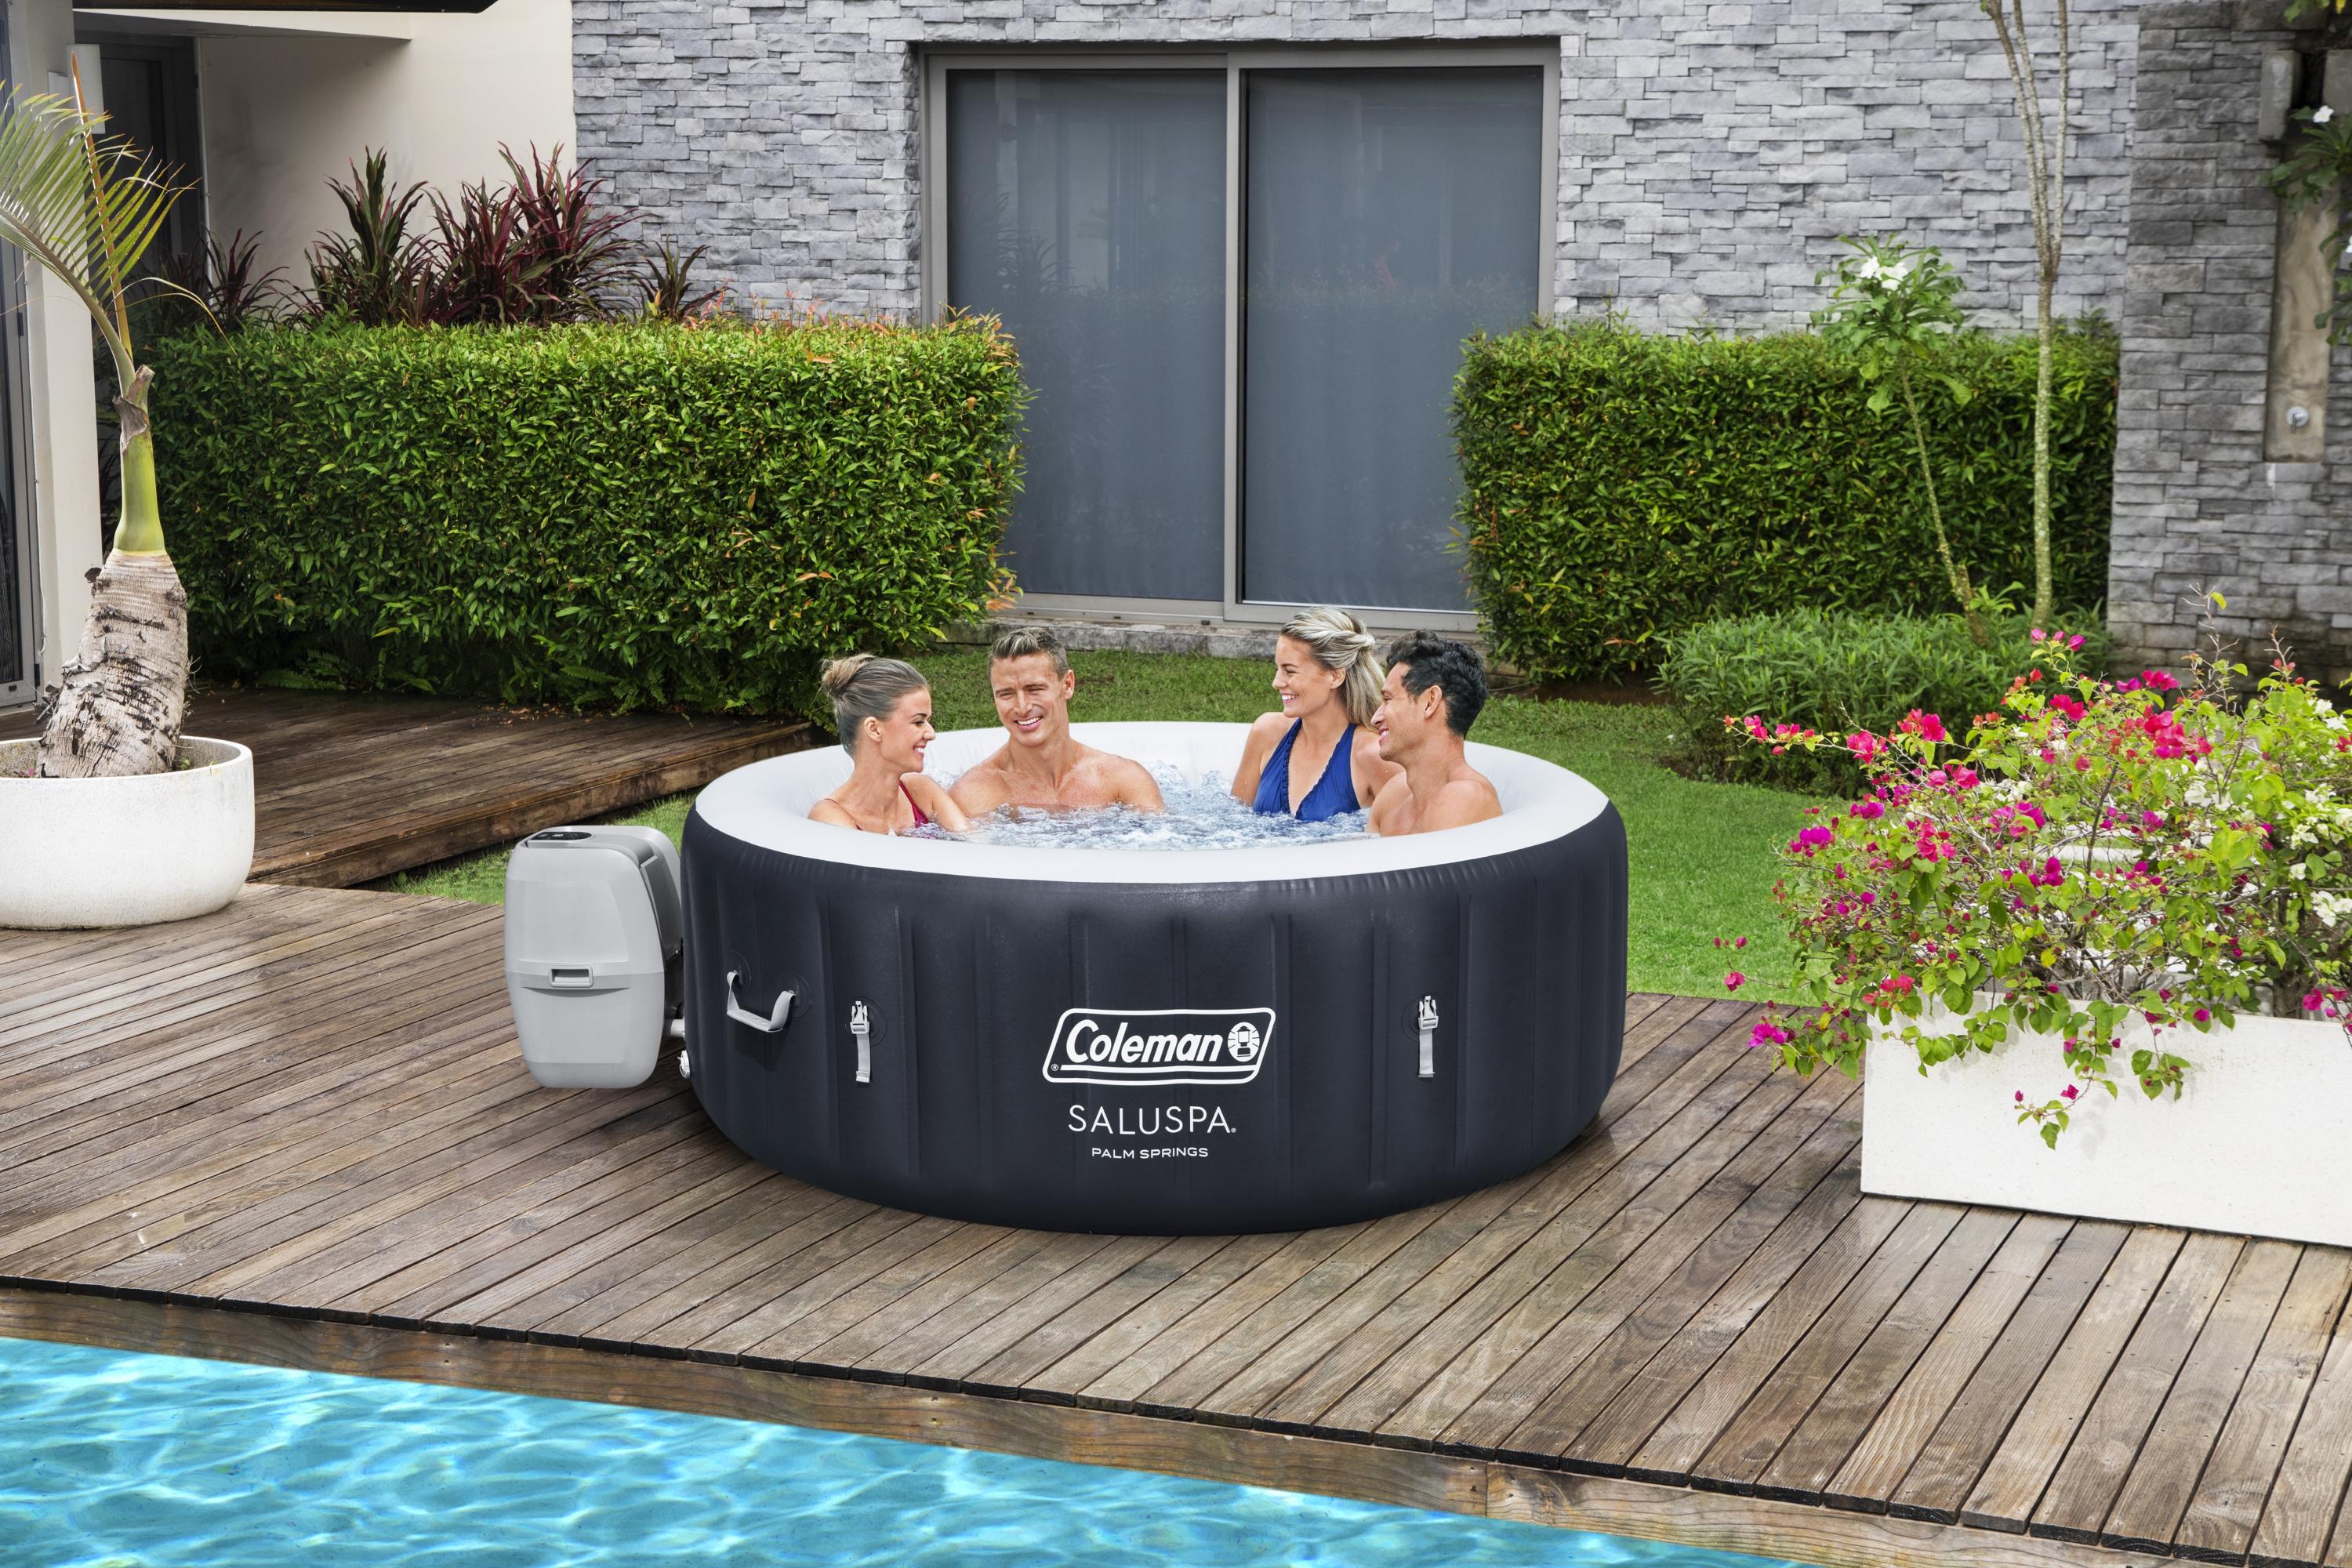 Coleman Palm Springs AirJet Inflatable Hot Tub Spa 4-6 person - image 2 of 8